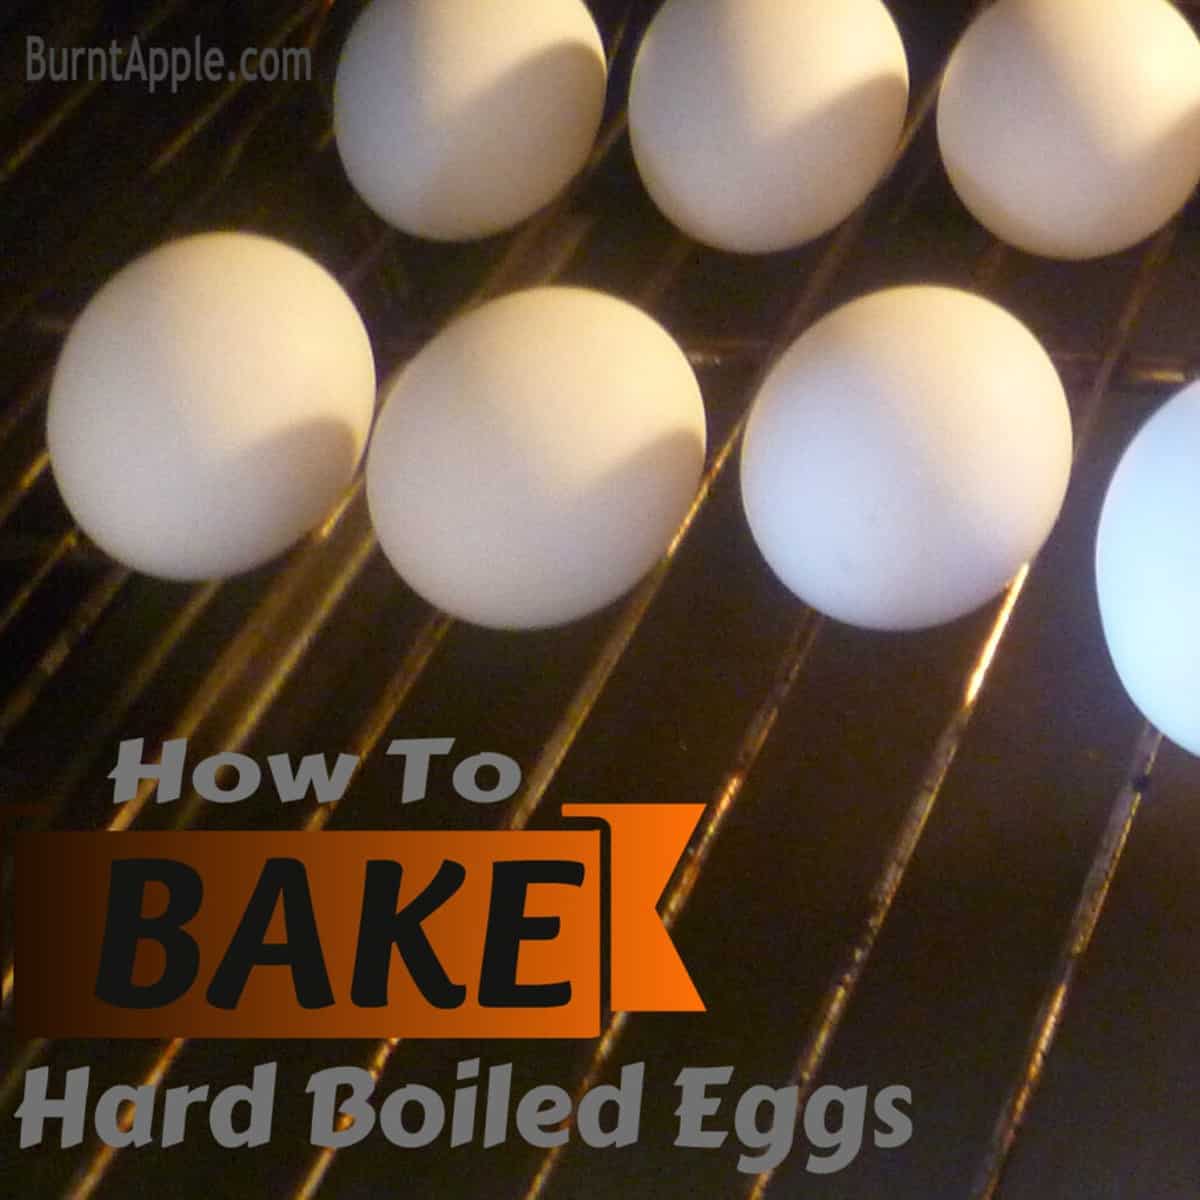 a picture of baked hard boiled eggs cooking on wire racks in the oven